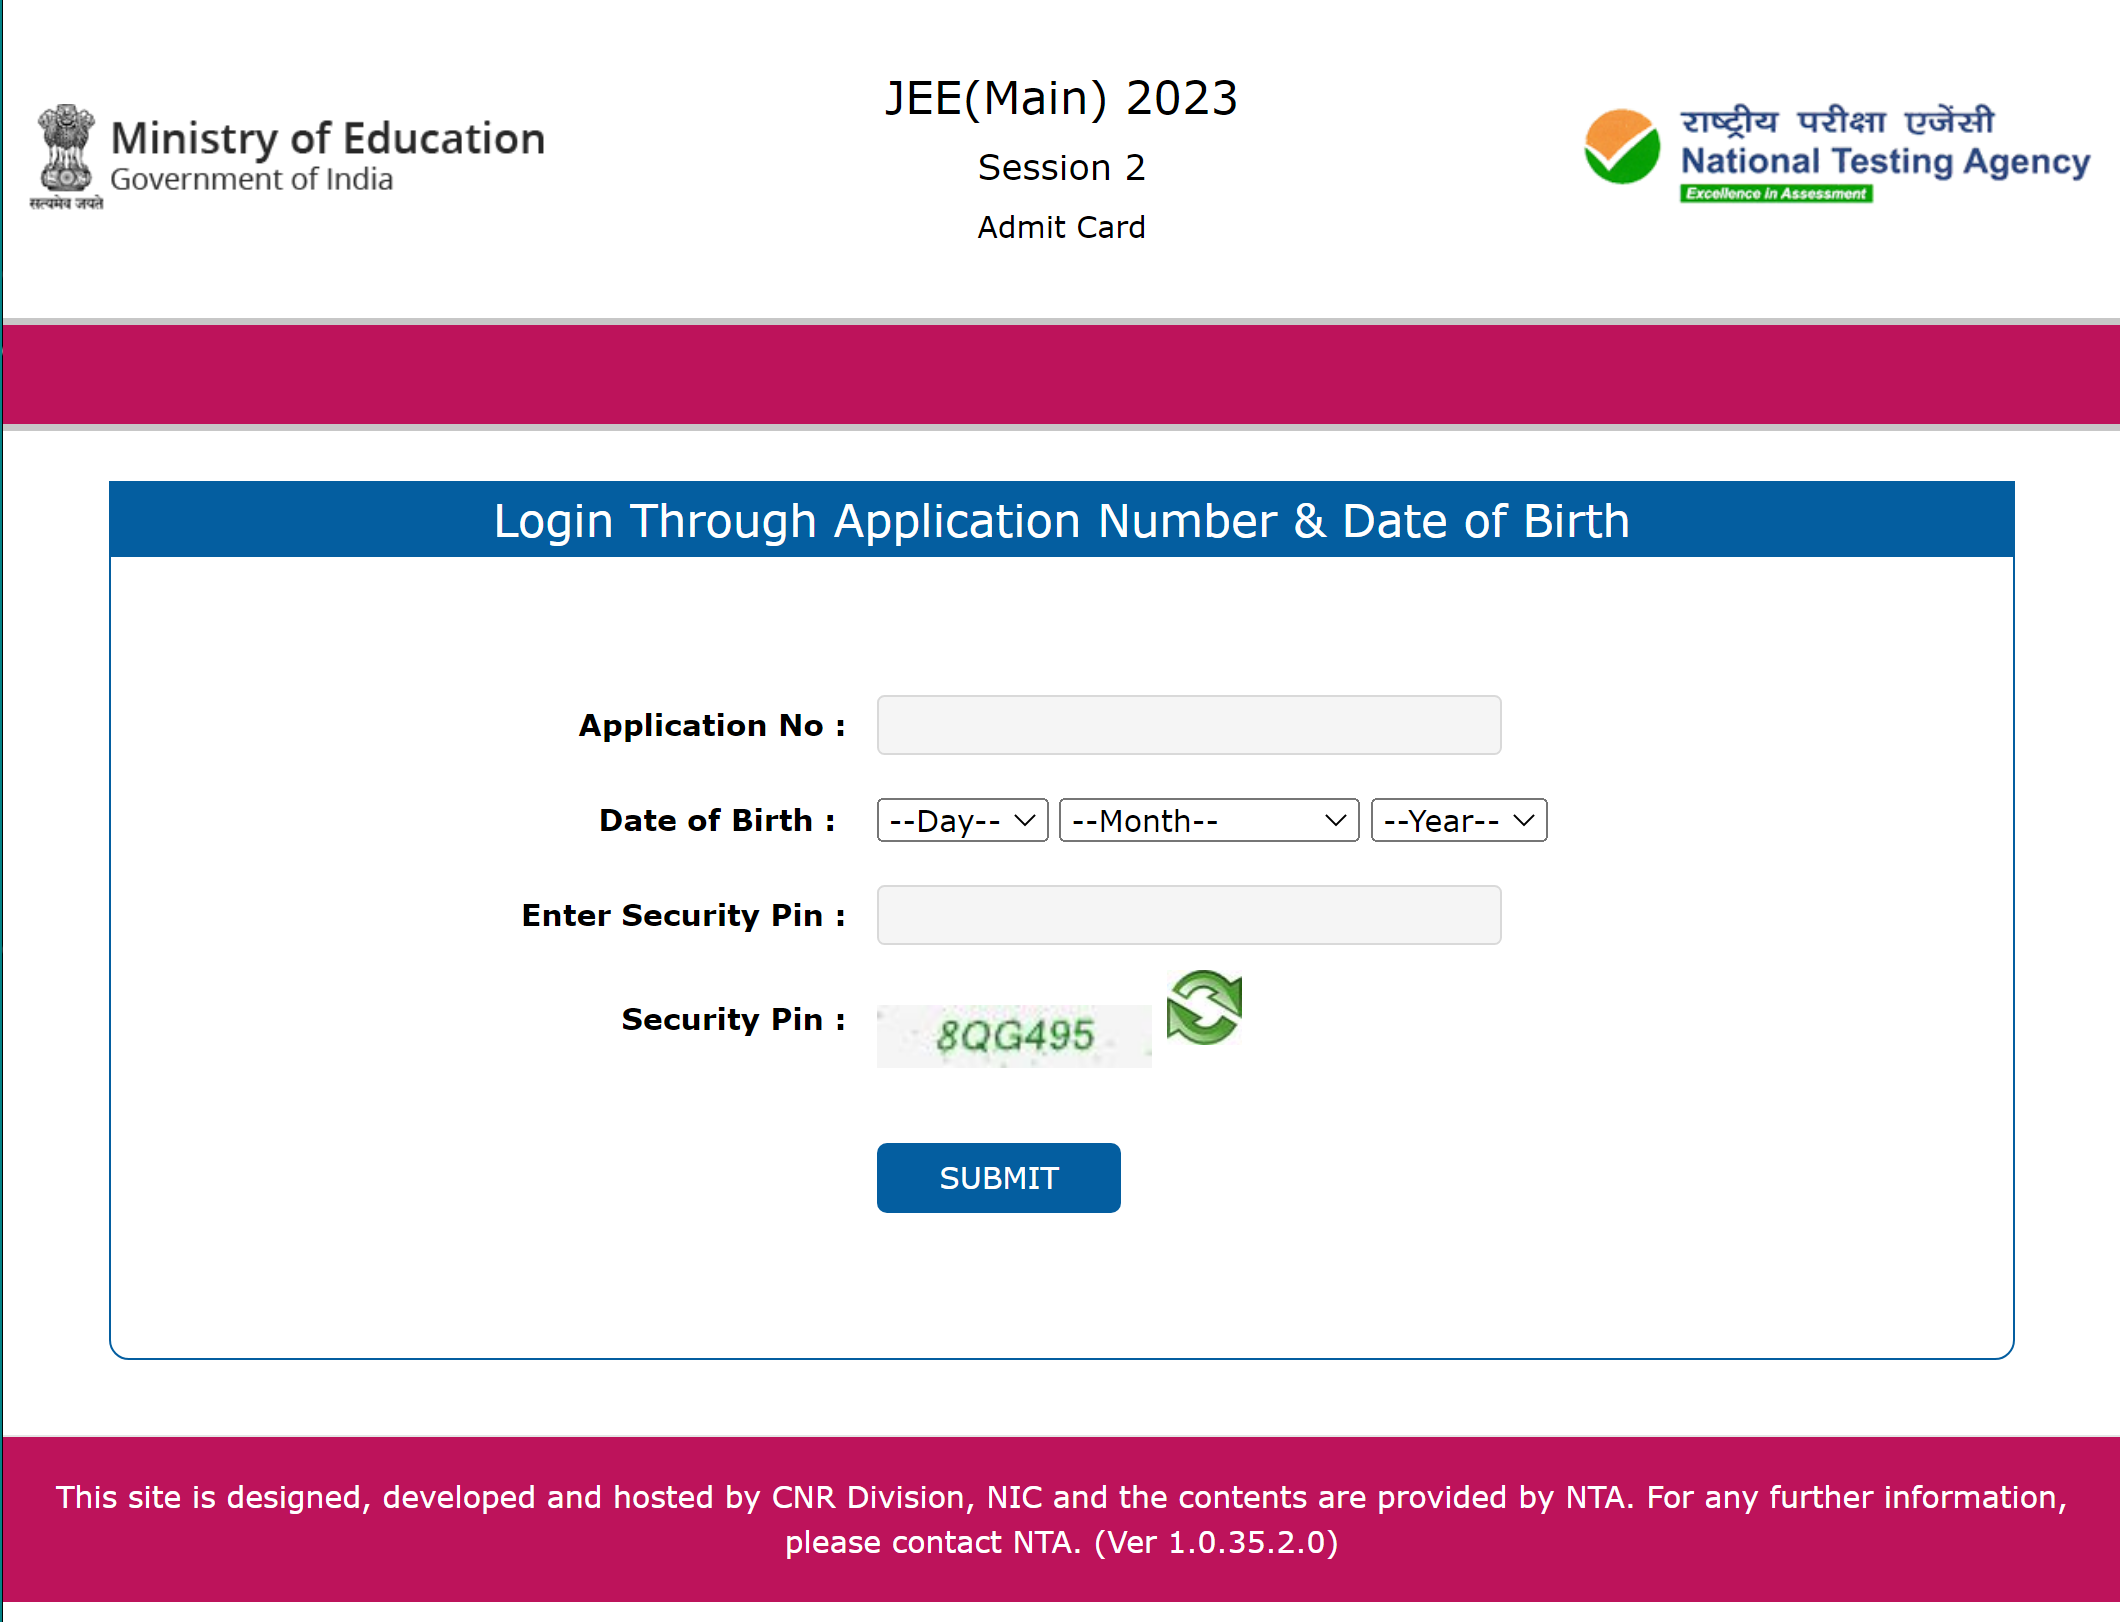 jee main session 2 admit card link download 